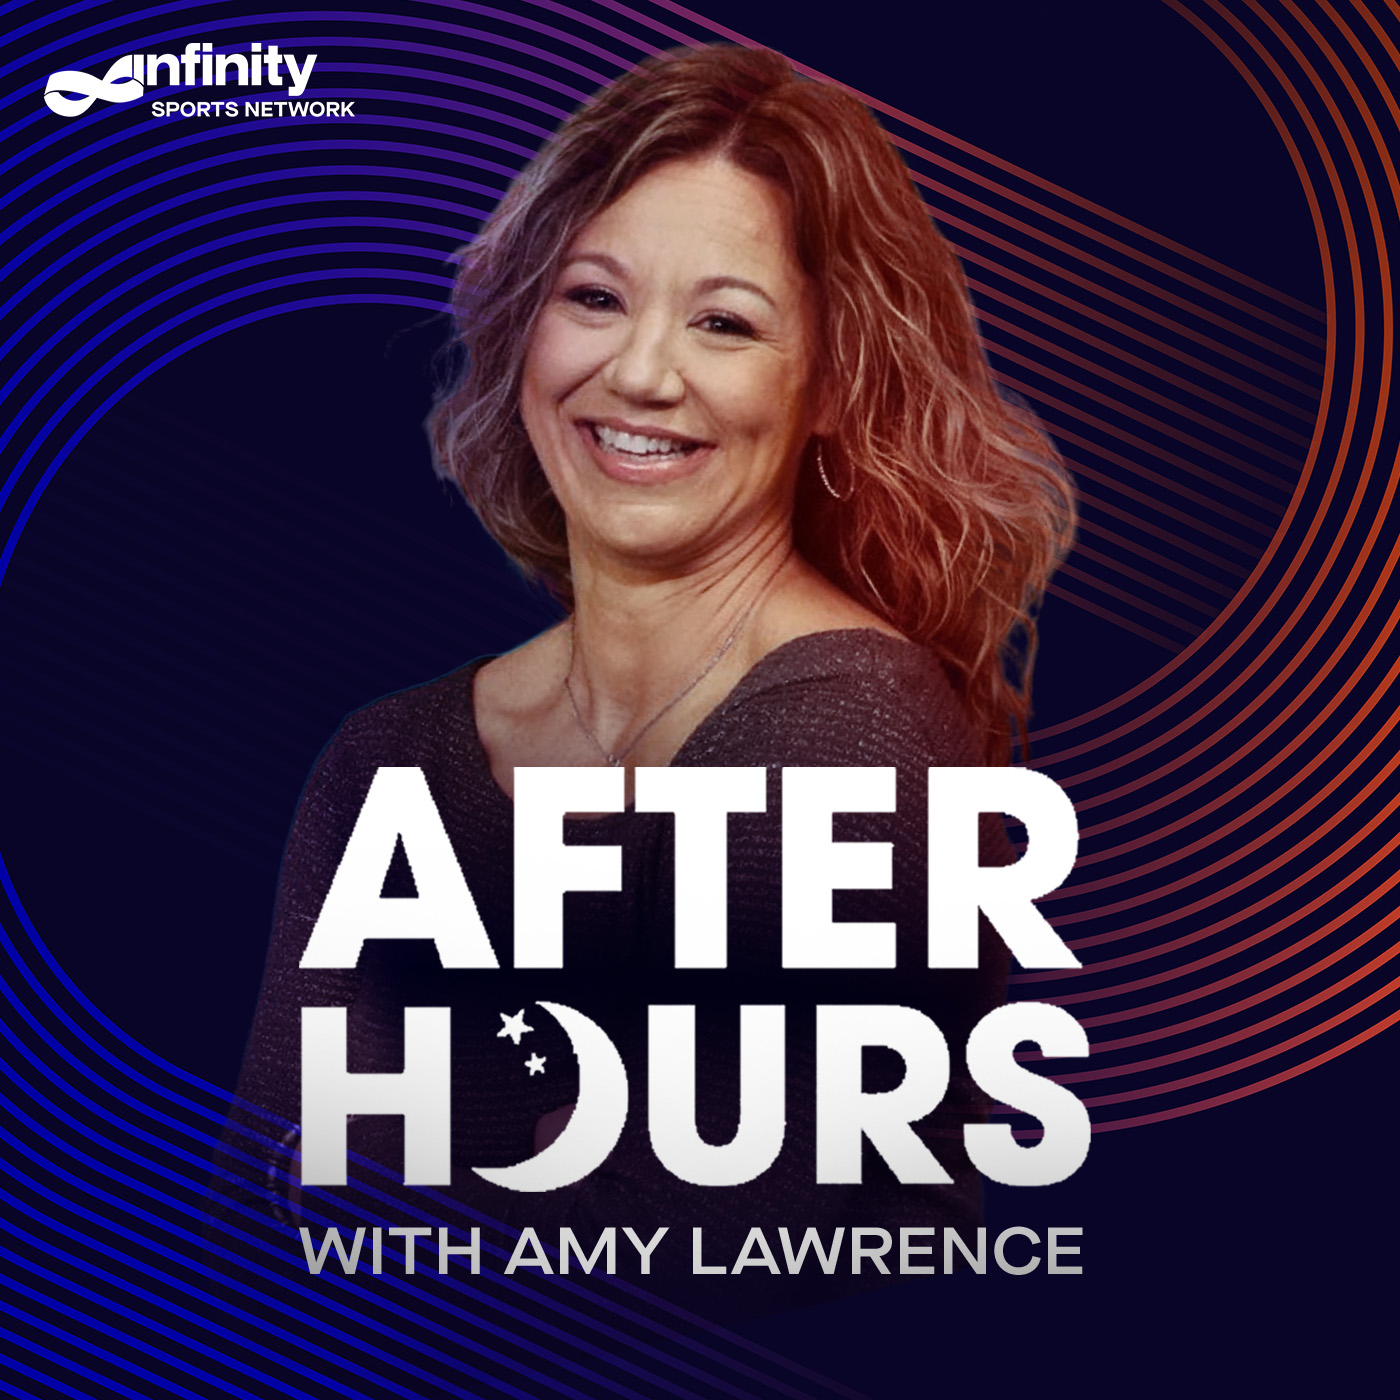 1-25-22 After Hours with Amy Lawrence PODCAST: Hour 3